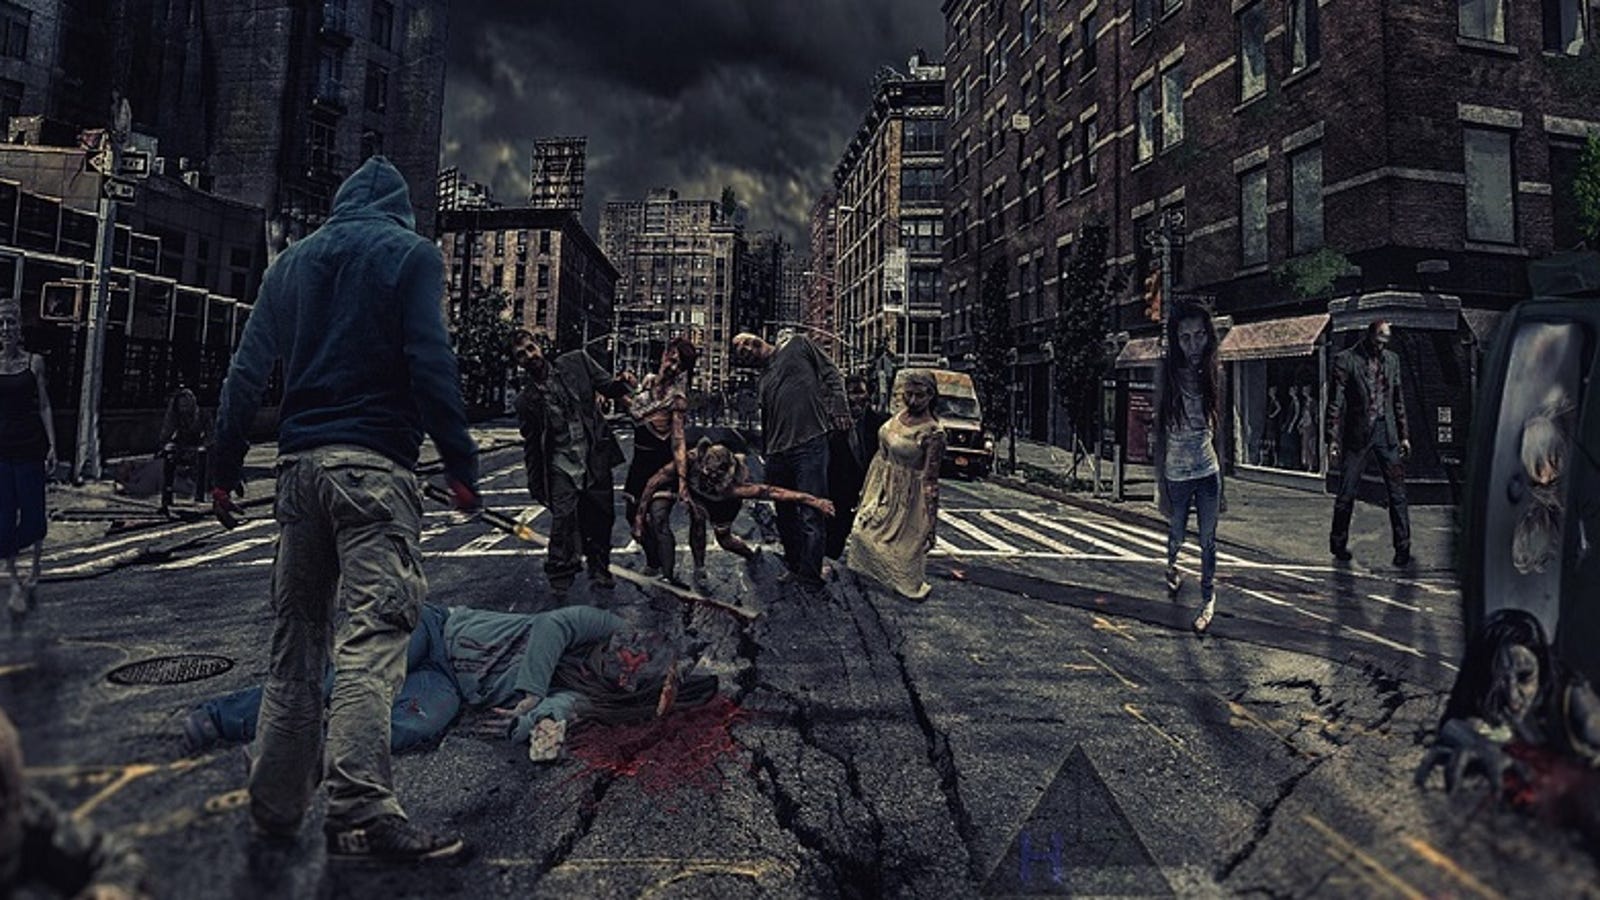 These Are the Best Cities for Surviving the Zombie Apocalypse